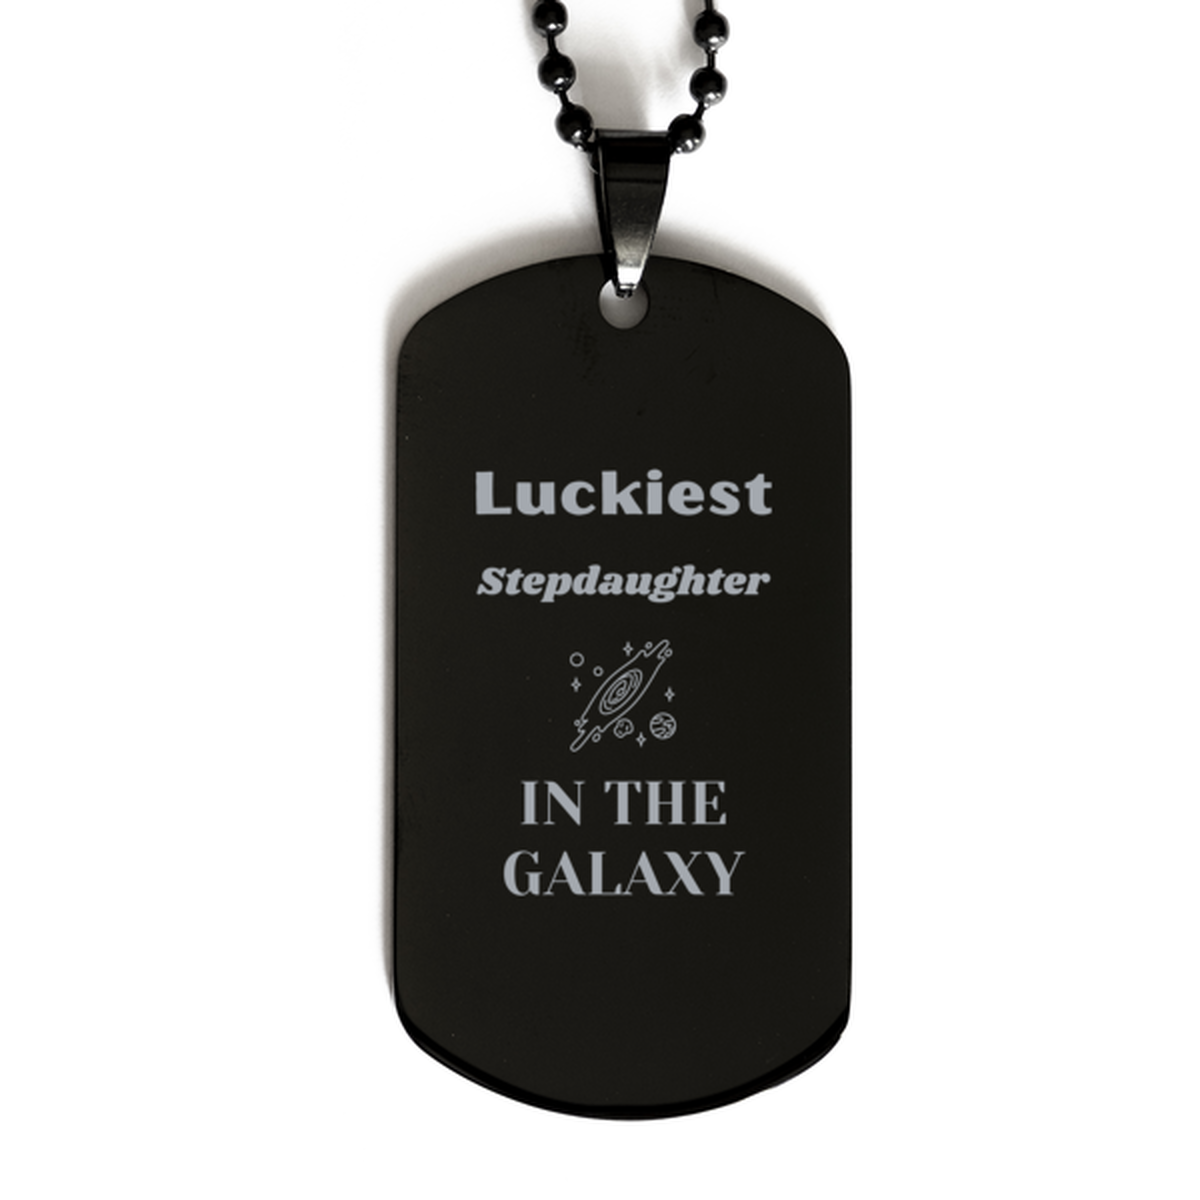 Luckiest Stepdaughter in the Galaxy, To My Stepdaughter Engraved Gifts, Christmas Stepdaughter Black Dog Tag Gifts, X-mas Birthday Unique Gifts For Stepdaughter Men Women